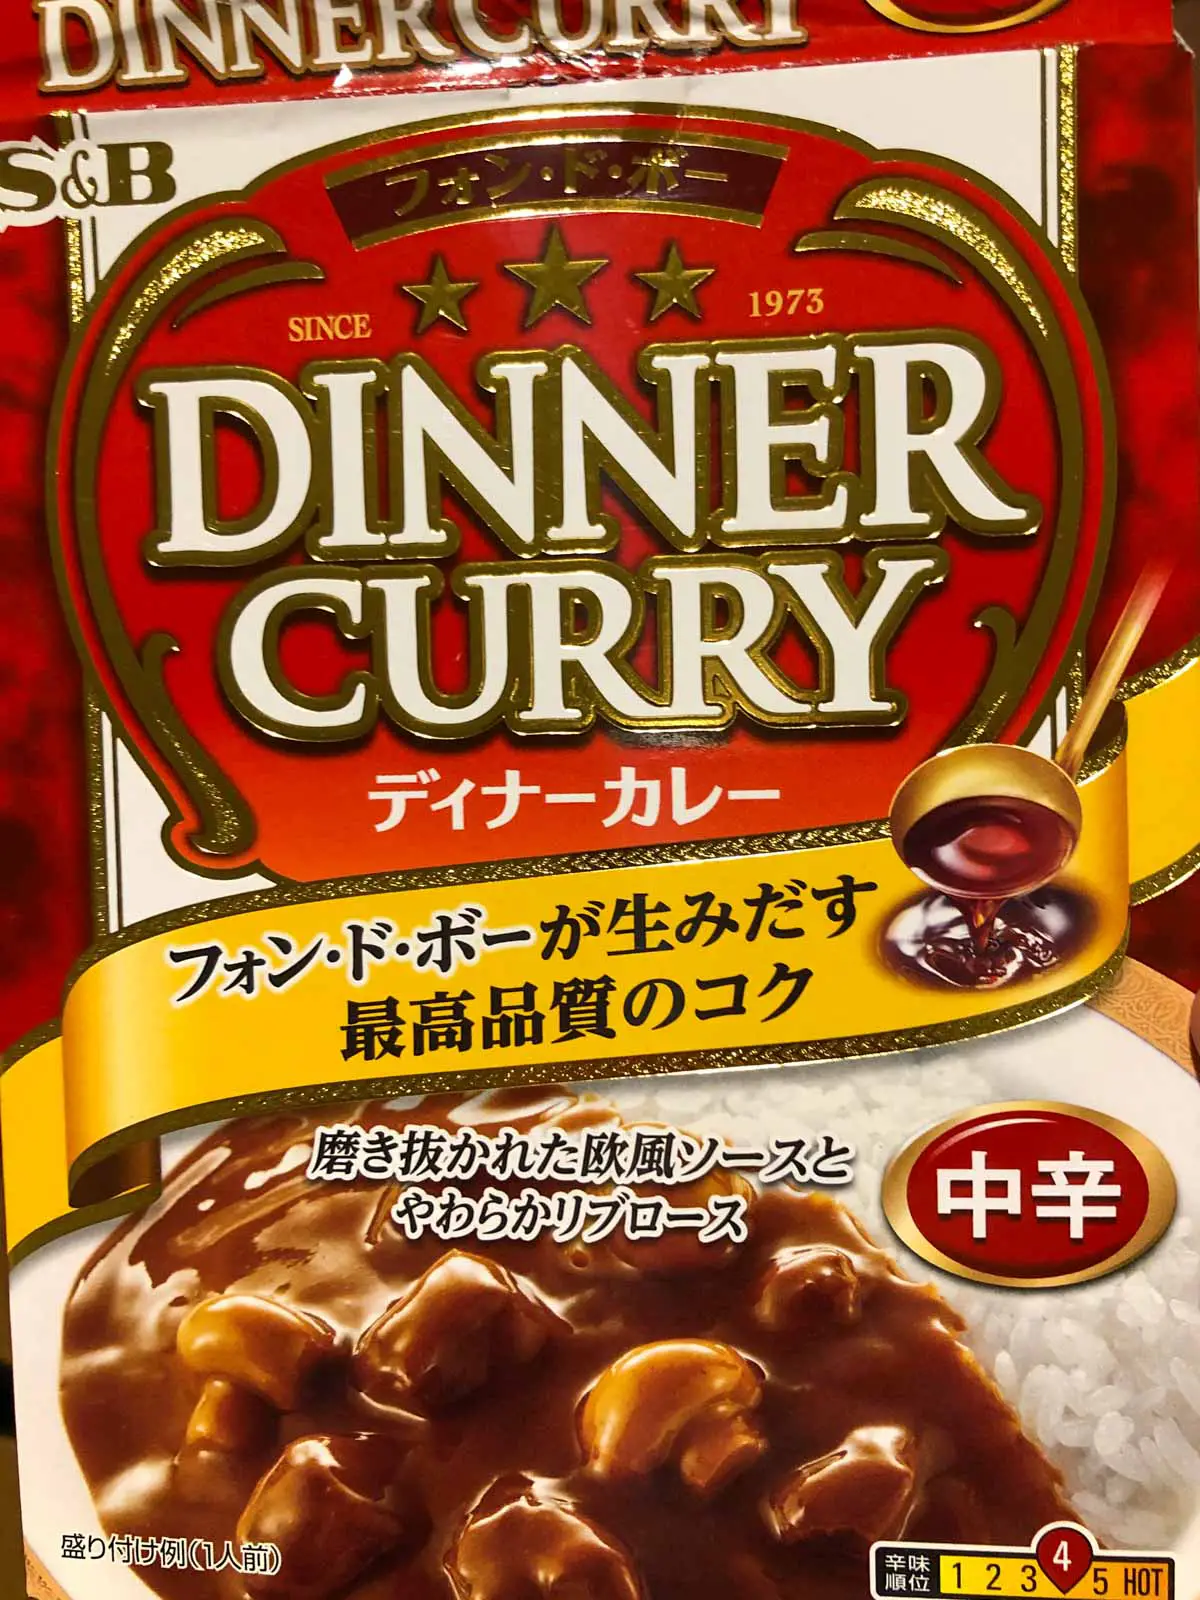 A package of Japanese Dinner Curry from S&B.